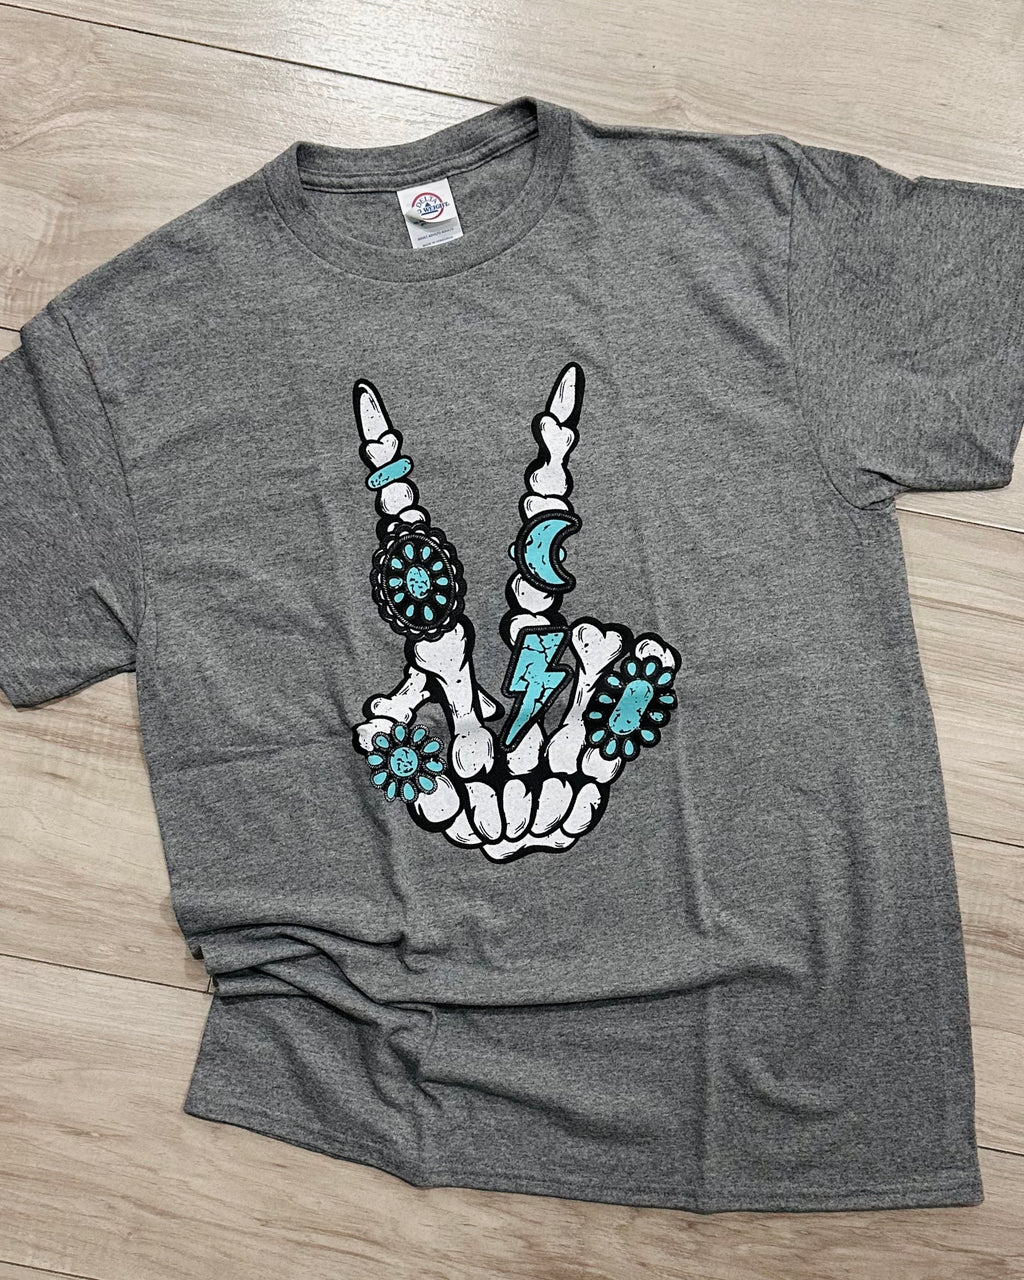 Turquoise Skelly Graphic Tee